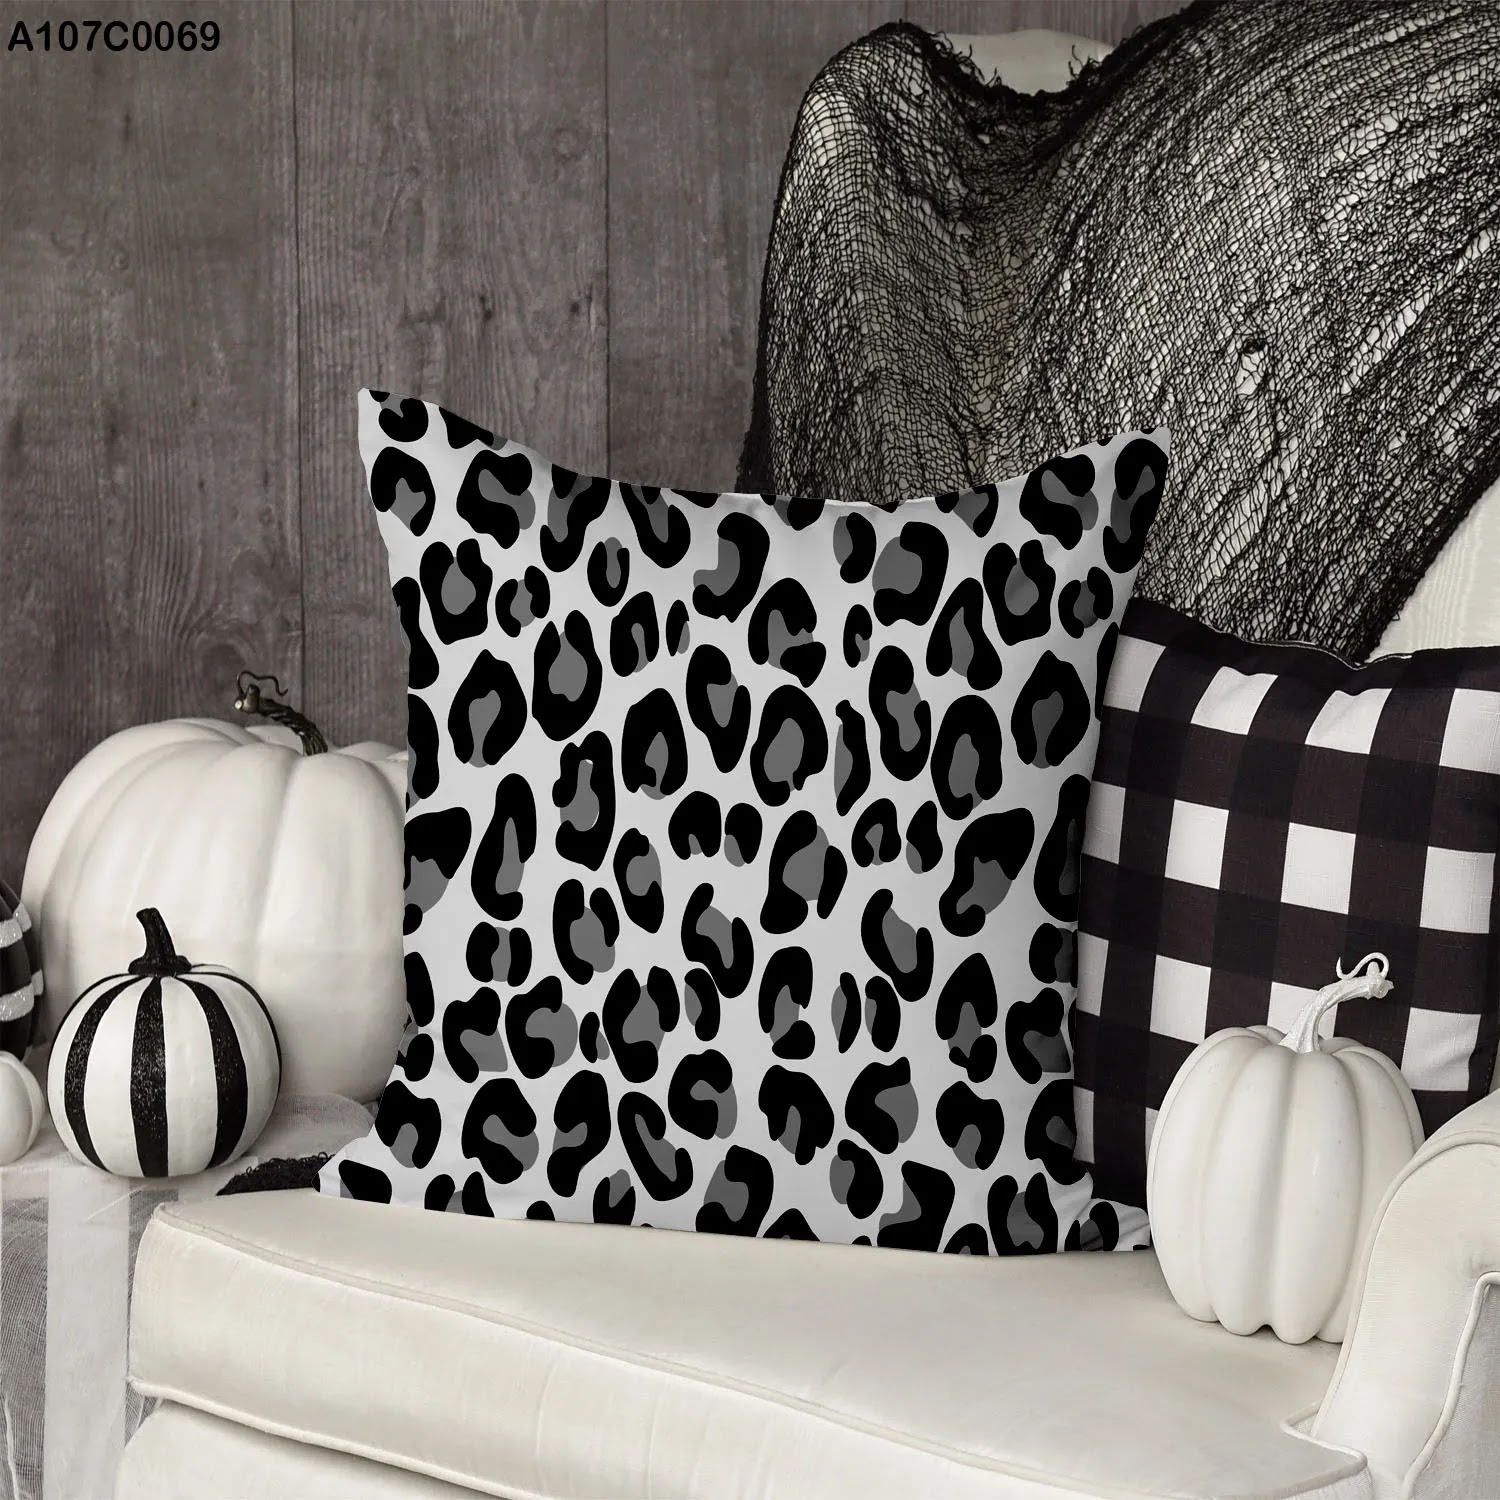 Pillow case with white & black  Leopard skin pattern